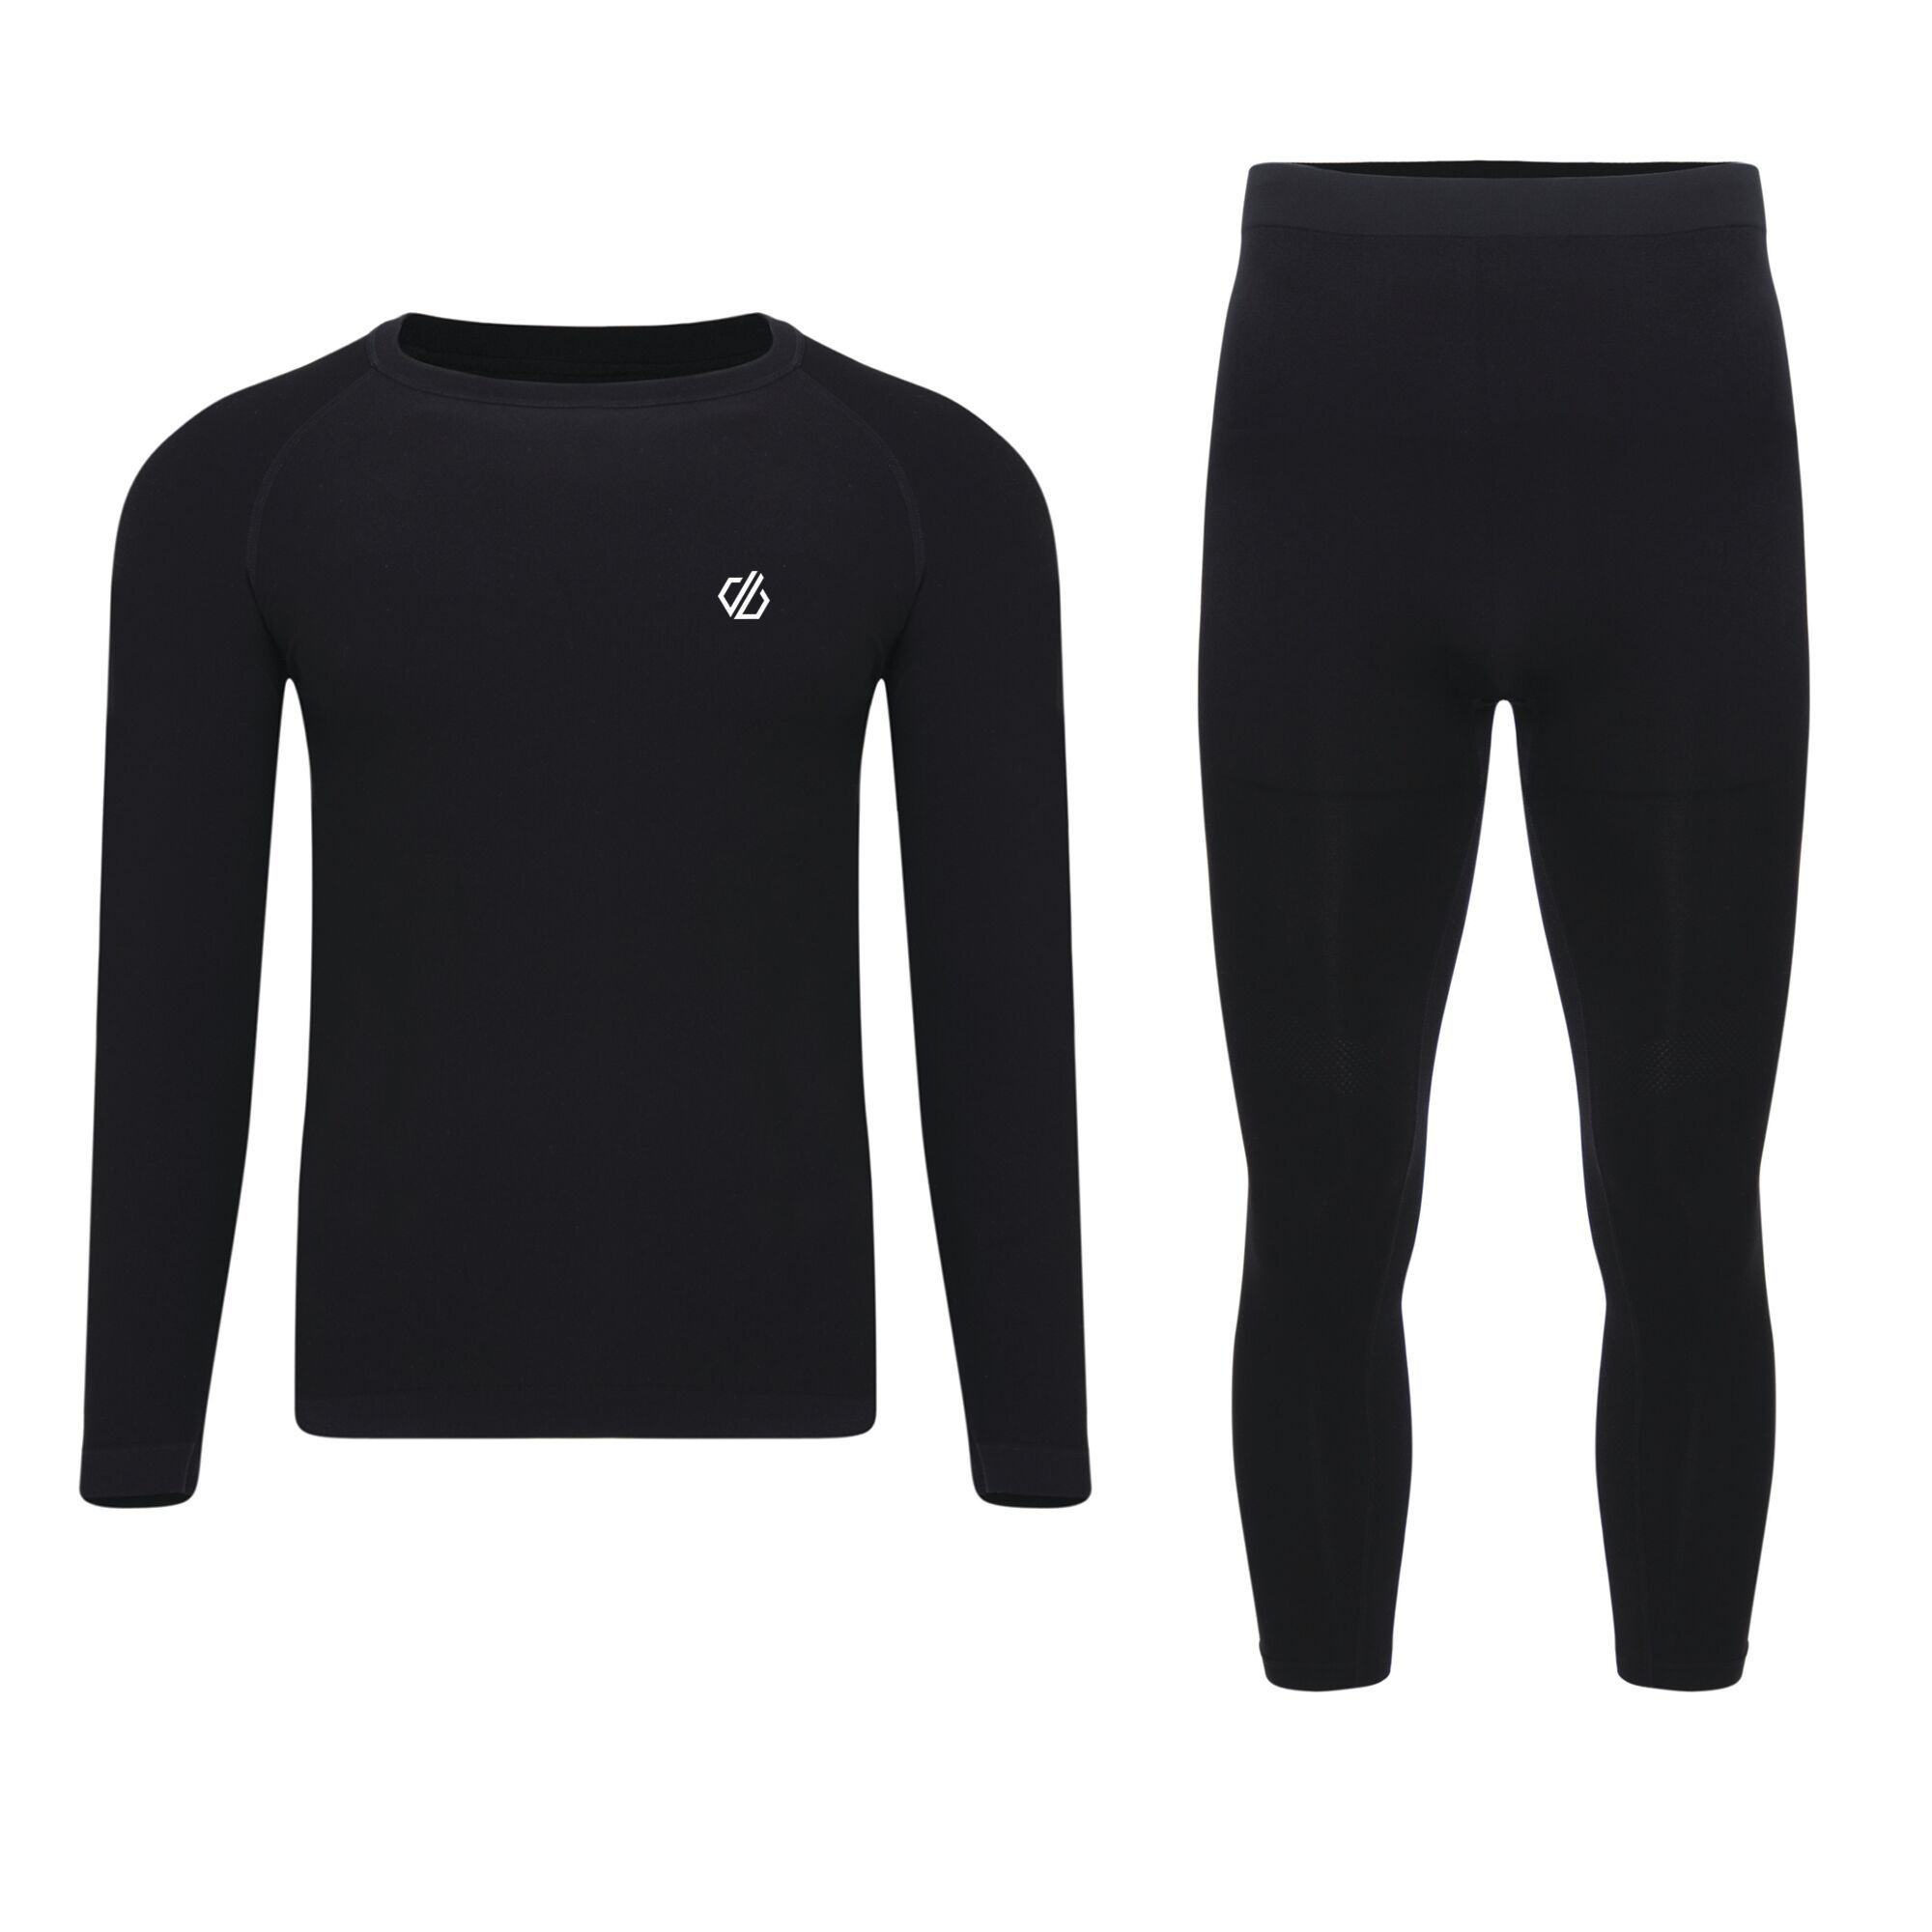 Material: 68% Polyester, 26% Nylon, 6% Elastane. Performance base layer collection. SeamSmart Technology. Q-Wic Seamless polyester/elastane knitted fabric. Ergonomic body map fit. Fast wicking and quick drying properties.  odour control treatment. Dare 2B Mens Sizing (chest approx): XXS (34in/86cm), XS (36in/92cm), S (38in/97cm), M (40in/102cm), L (42in/107cm), XL (44in/112cm), XXL (47in/119cm), XXXL (50in/127cm), XXXXL (53in/134cm), XXXXXL (56in/142cm). Dare 2B Mens Tights/Shorts Sizing (waist approx): XS (28in/71cm), S (30in/76cm), M (32in/81cm), L (34in/86cm), XL (36in/92cm), XXL (38in/97cm), XXXL (40in/102cm), XXXXL (42in/107cm), XXXXXL (44in/112cm).